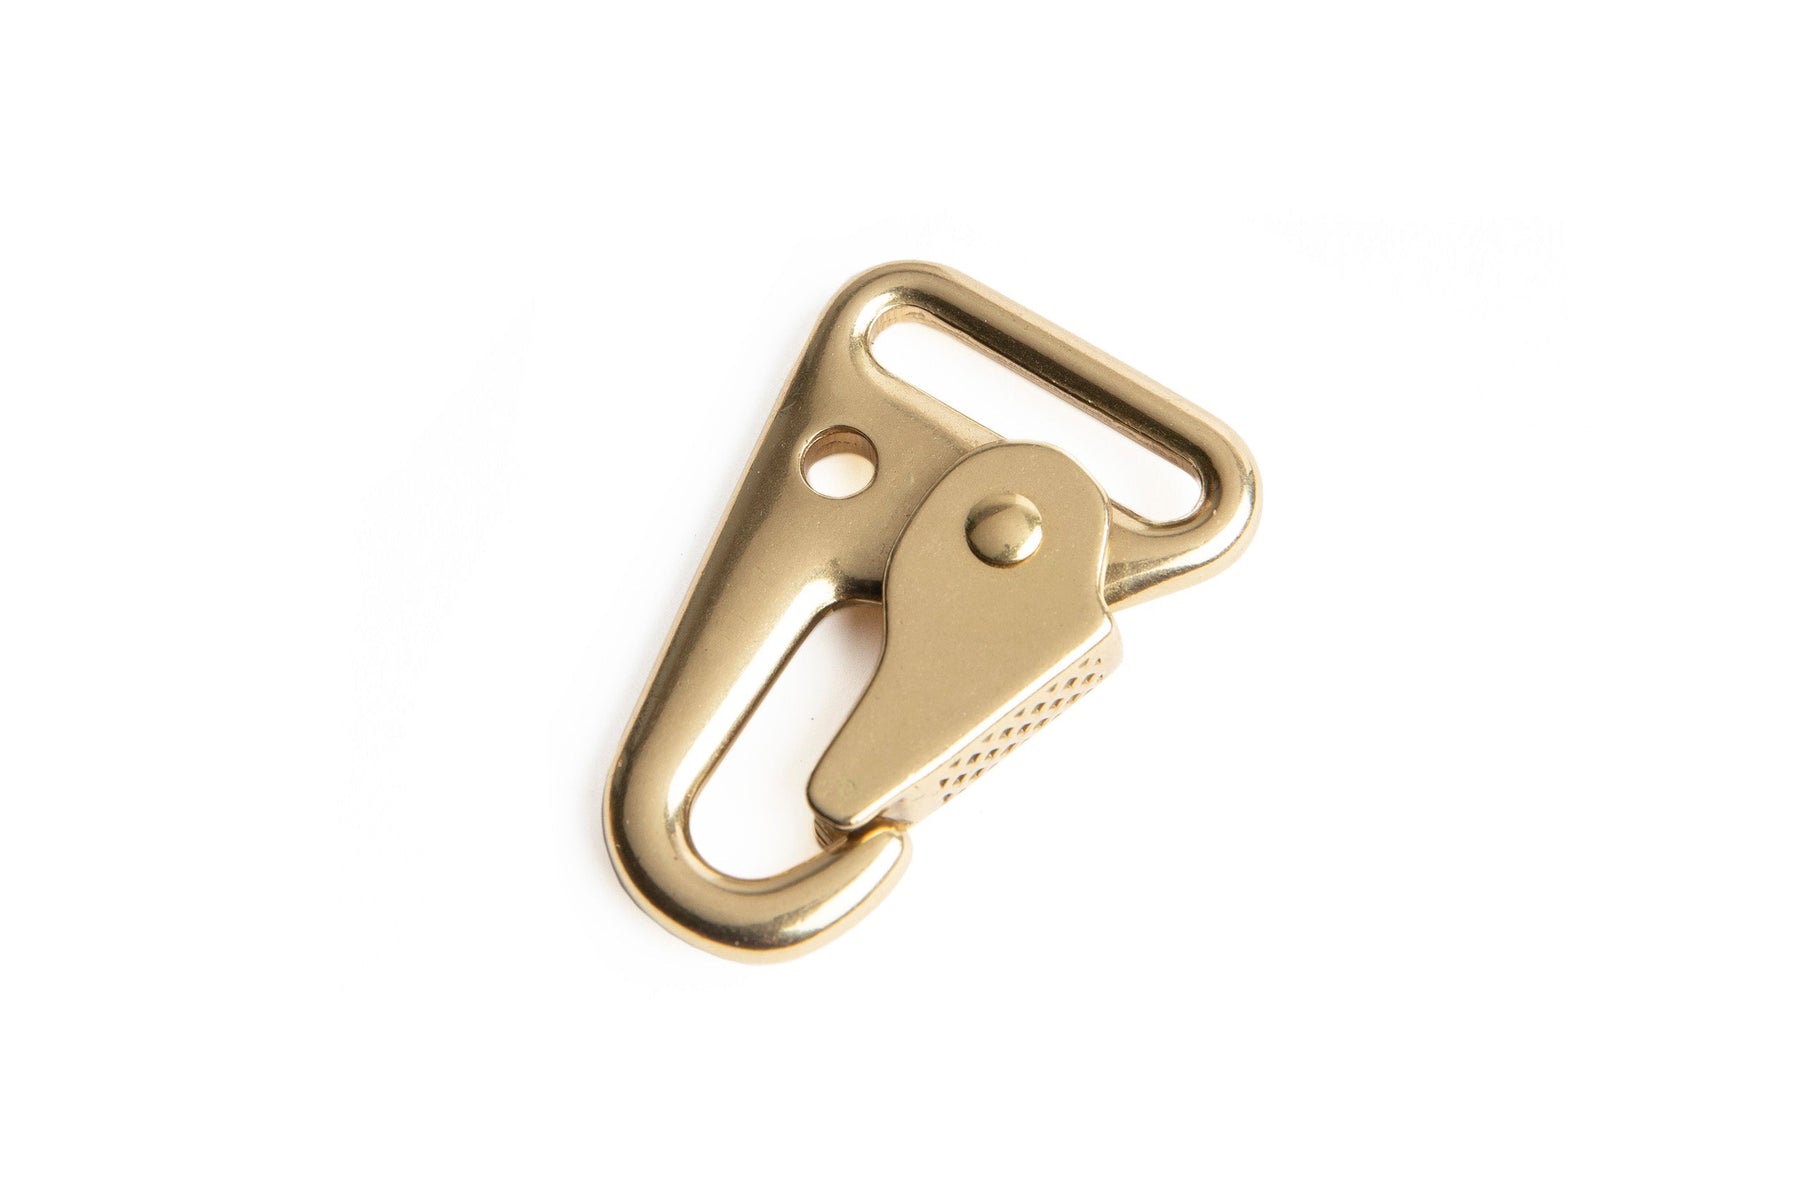 Rocky Mtn - Tactical Carabiner (Solid Brass)